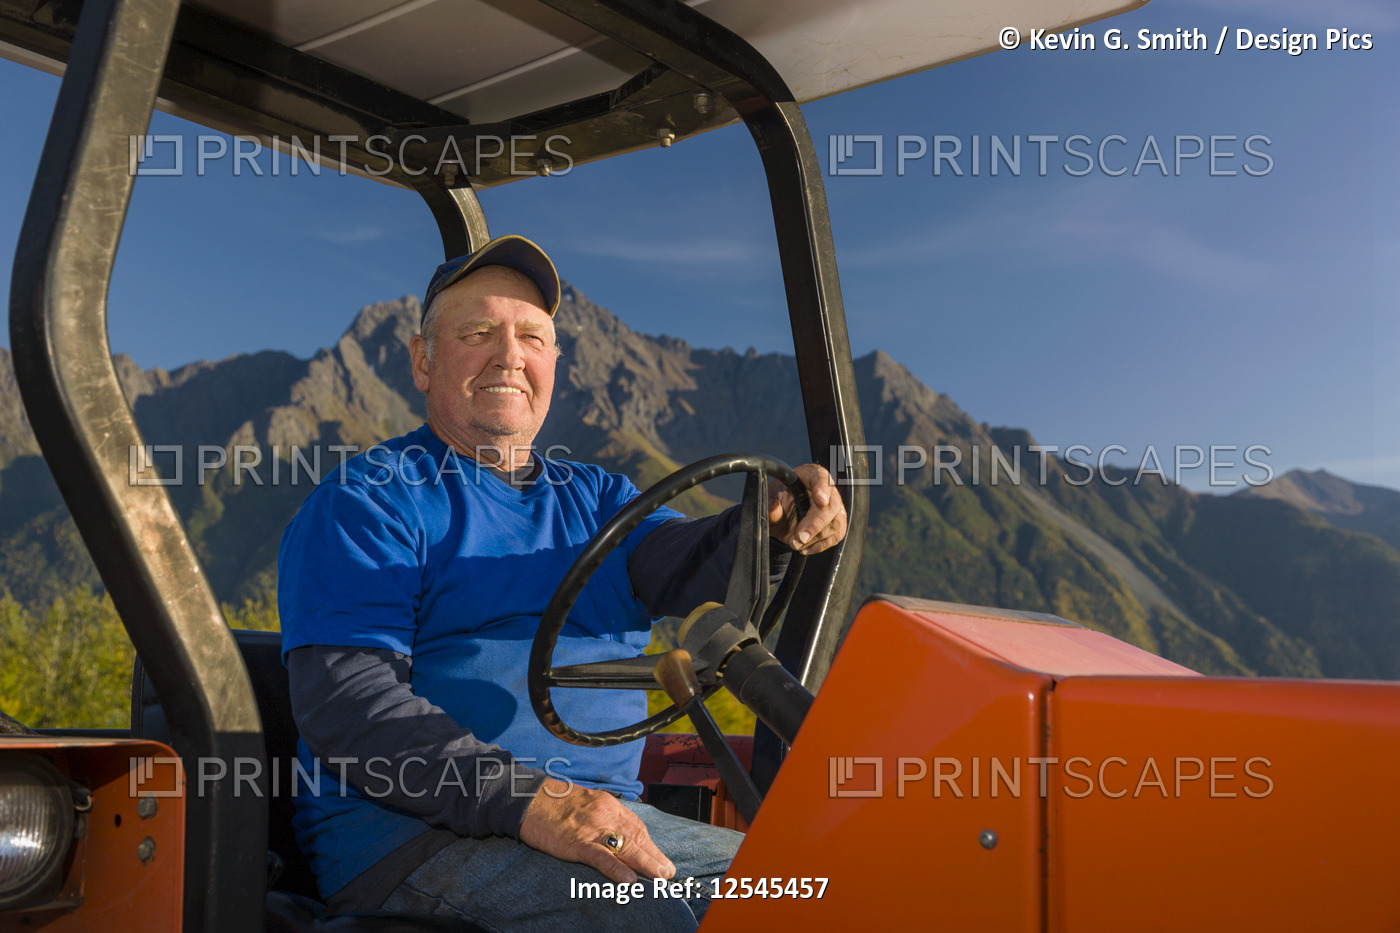 A farmer wearing a blue shirt sits on an old red tractor in an open field, ...